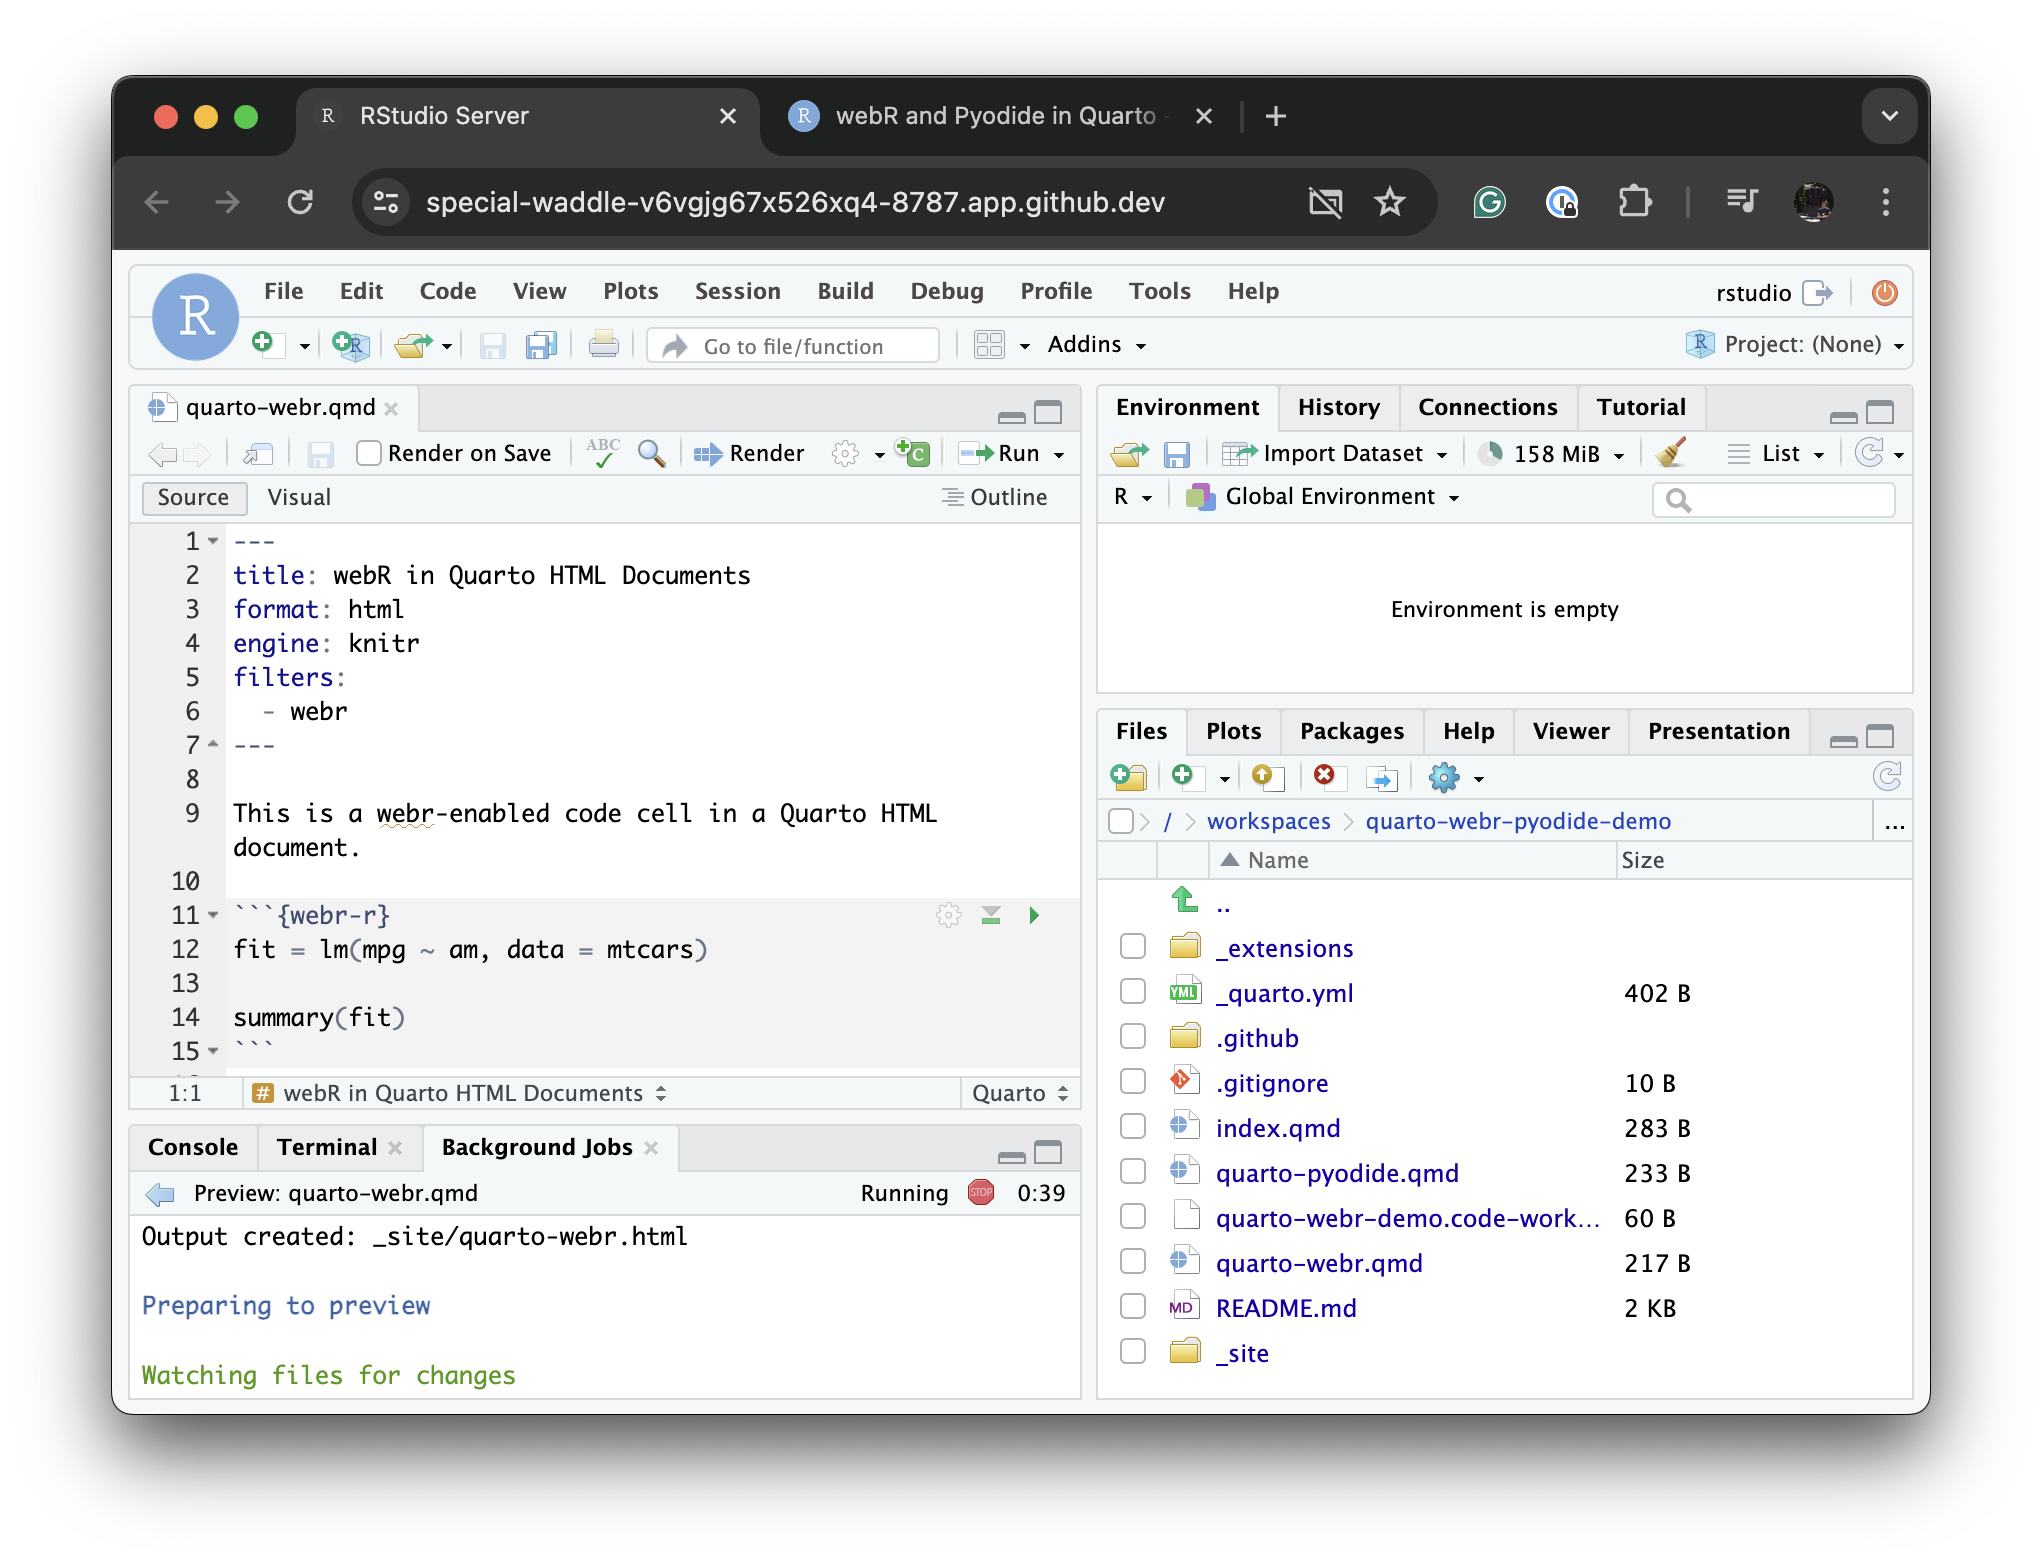 rstudio-authoring-workspace-launched.png